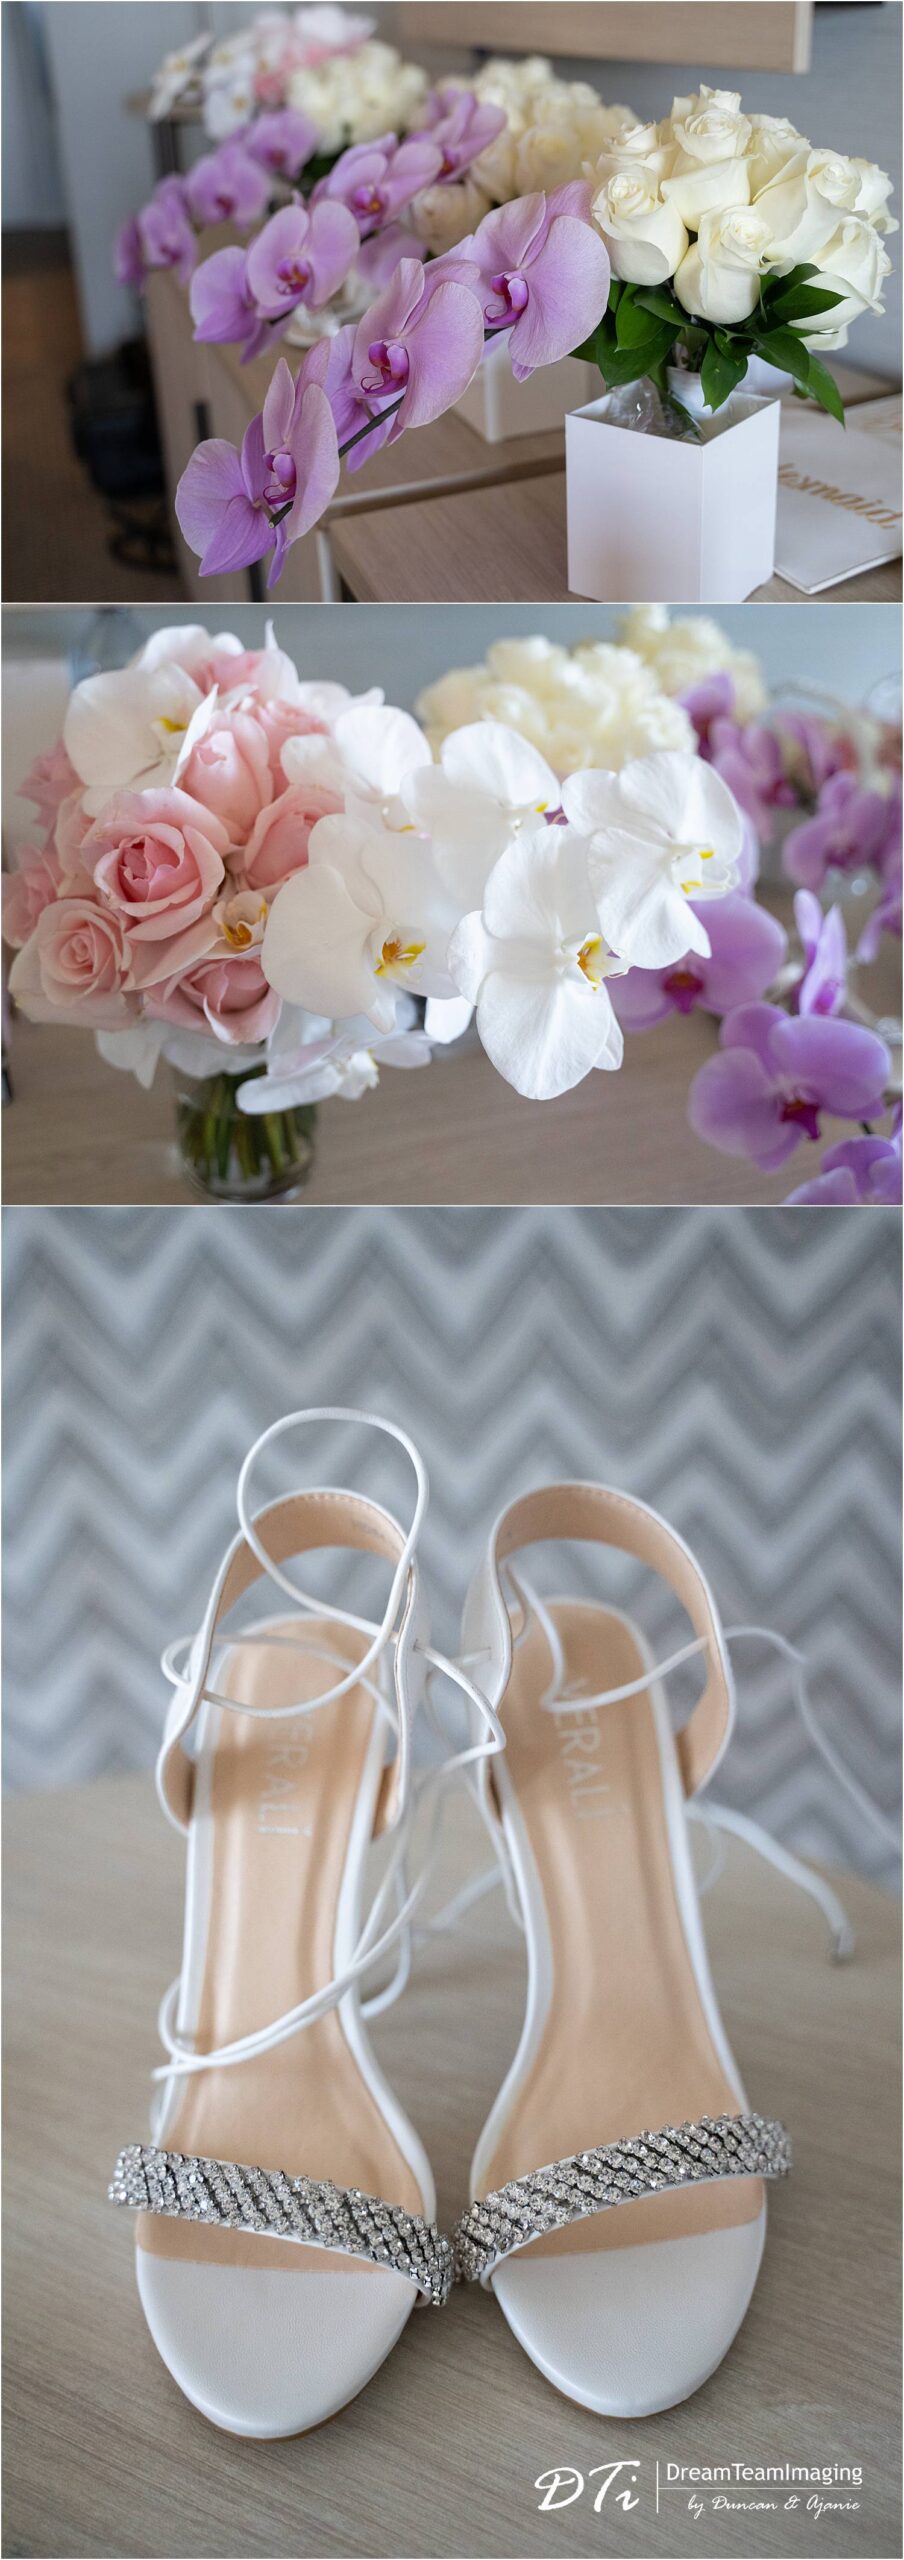 wedding details, flowers and shoes of the bride